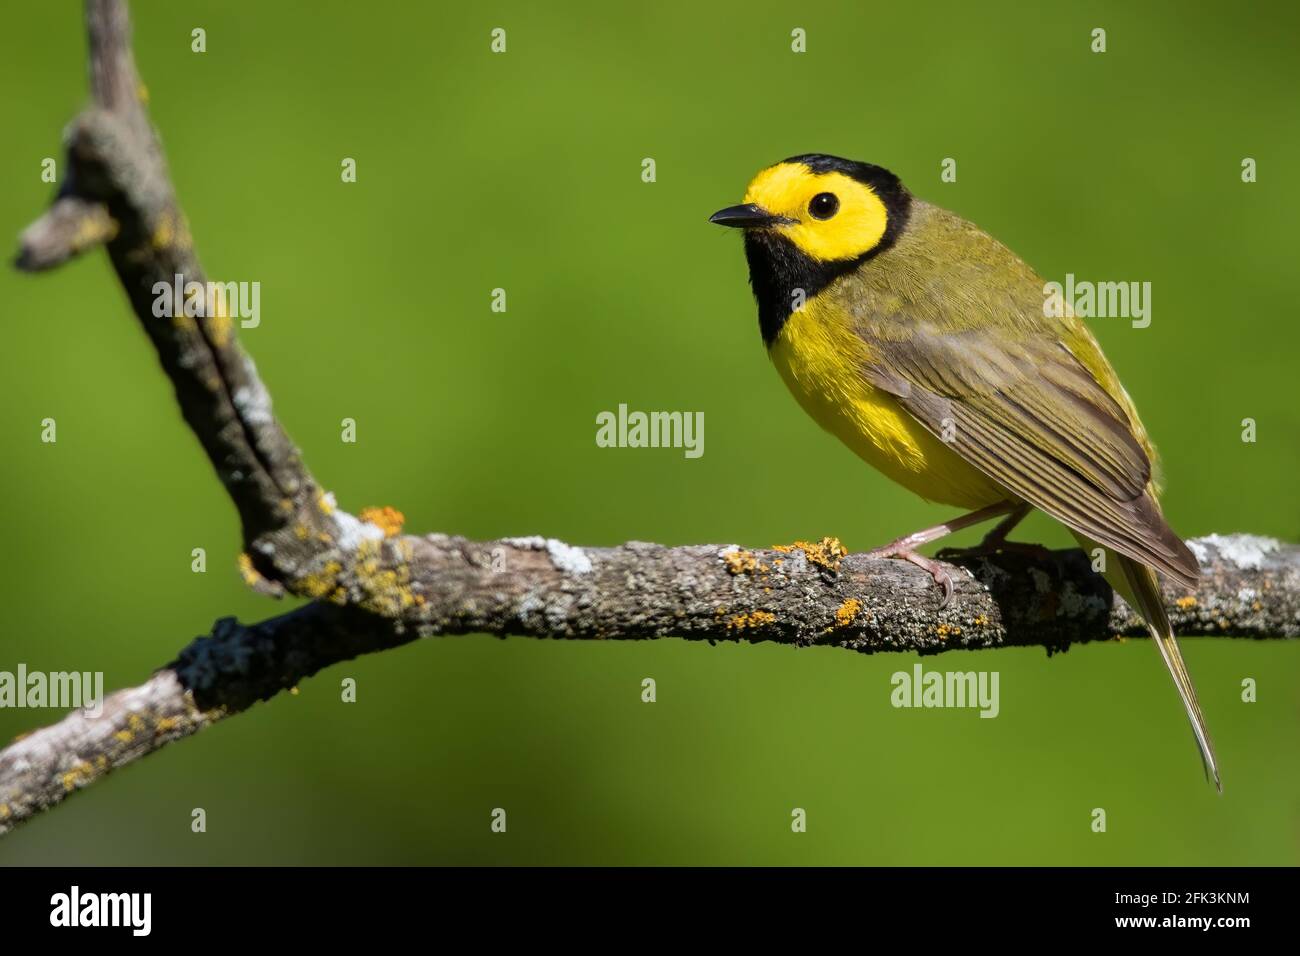 Adult male Hooded Warbler (Setophaga citrina) perched on a branch Stock Photo